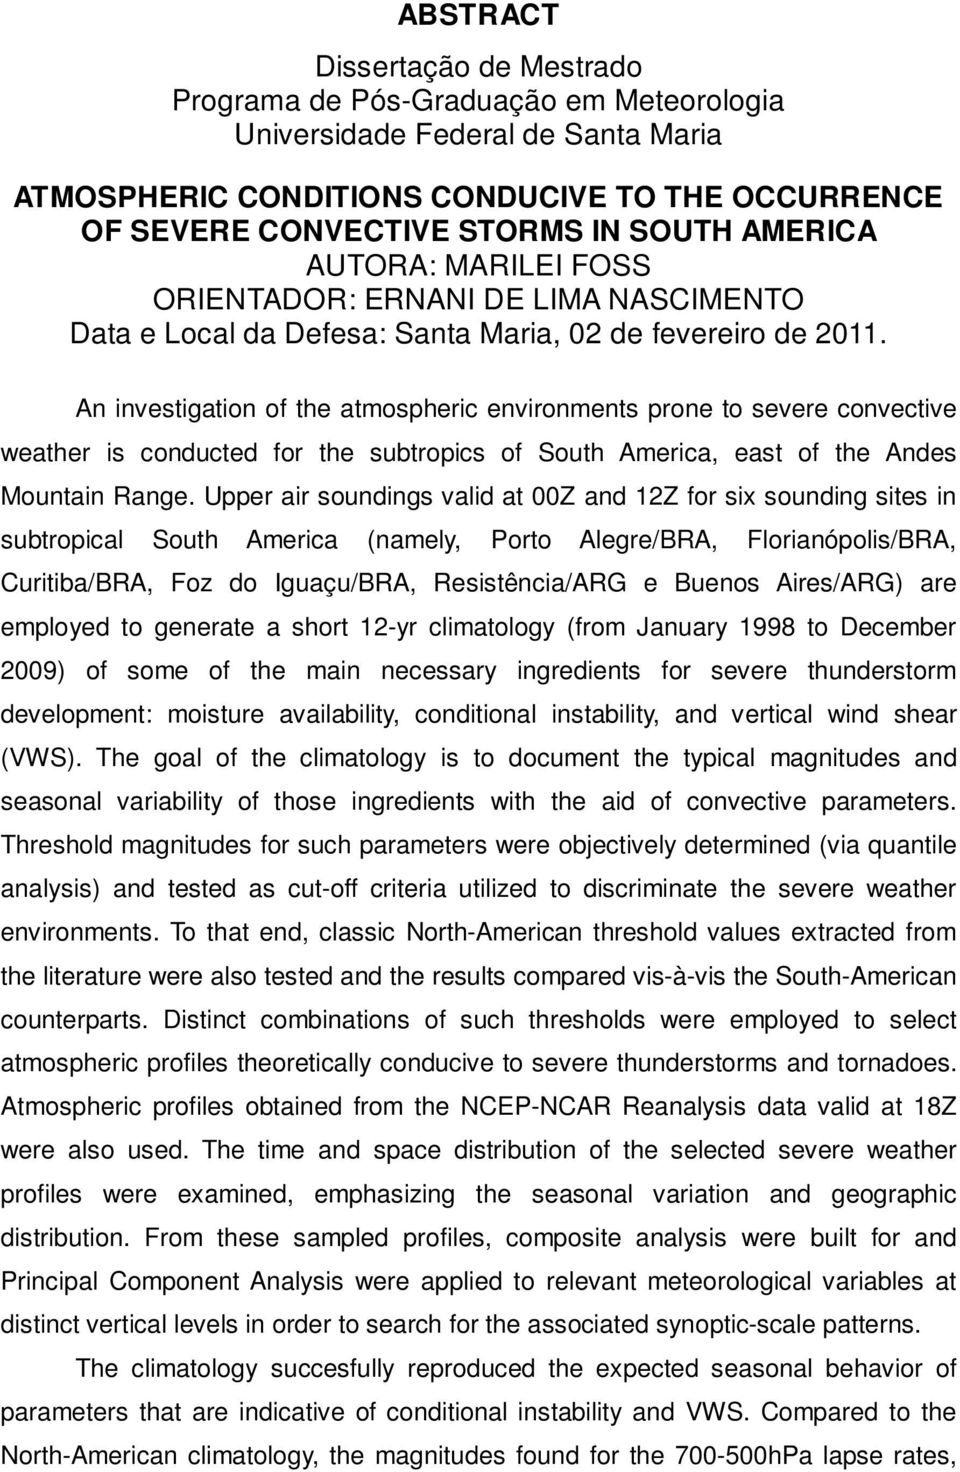 An investigation of the atmospheric environments prone to severe convective weather is conducted for the subtropics of South America, east of the Andes Mountain Range.